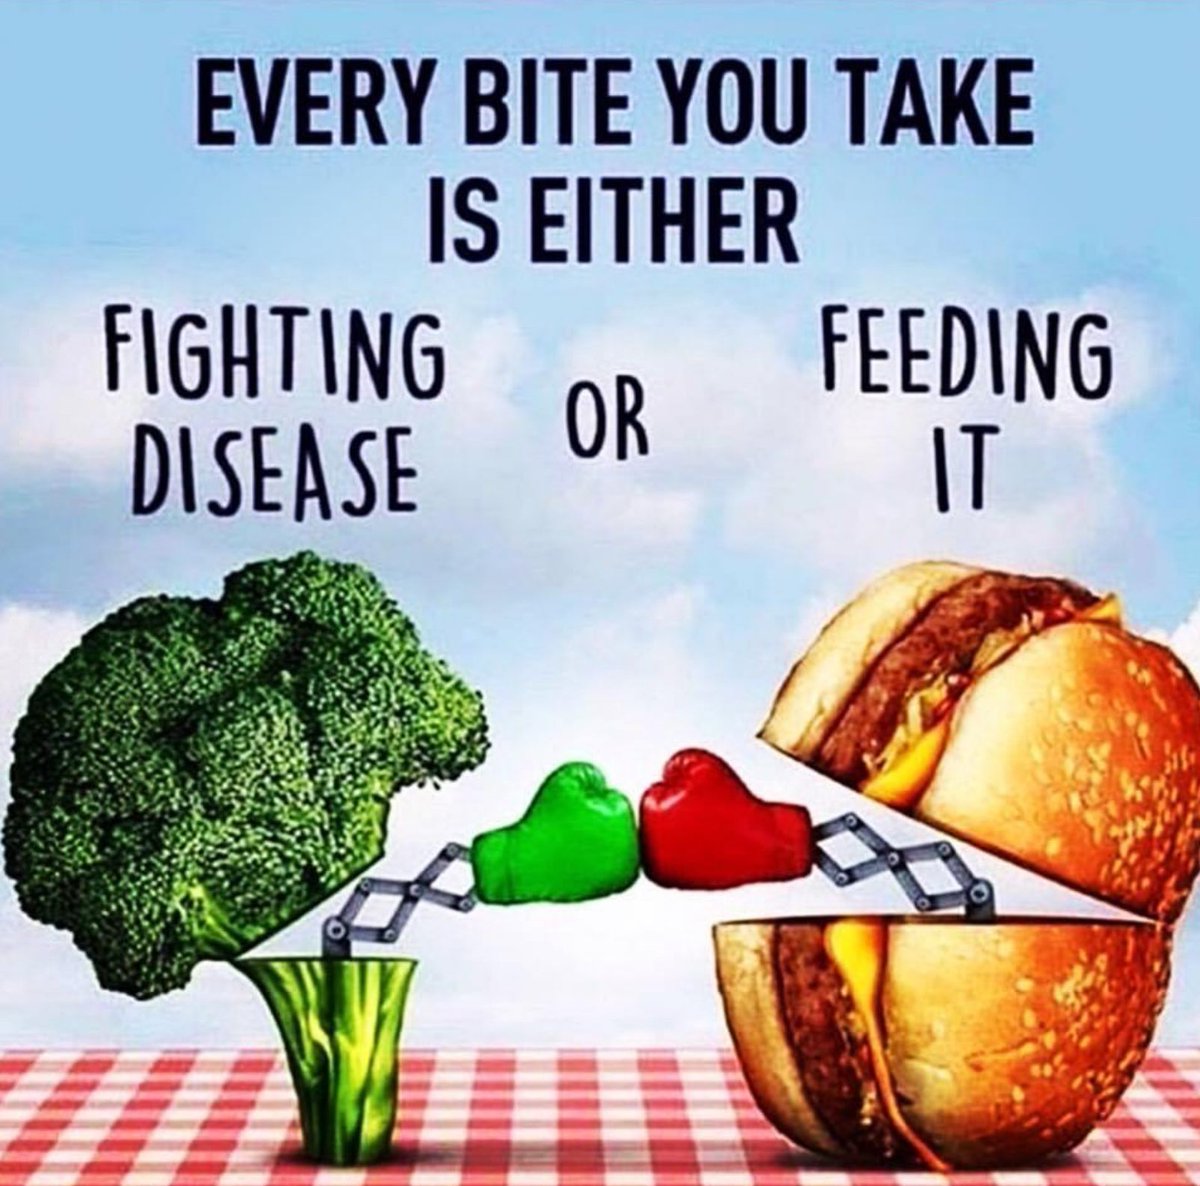 #didyouknow? Your health is in your choices #makehealthychoices #youdonthavetobesick #takecareofyourself #eatyourveggies #healthyeating #healthychoice #healthyliving #healthyhabits  #farmtotable #plantbaseddiet #youarewhatyoueat #didyouknow #vegetarianfood #fruitsandvegetables